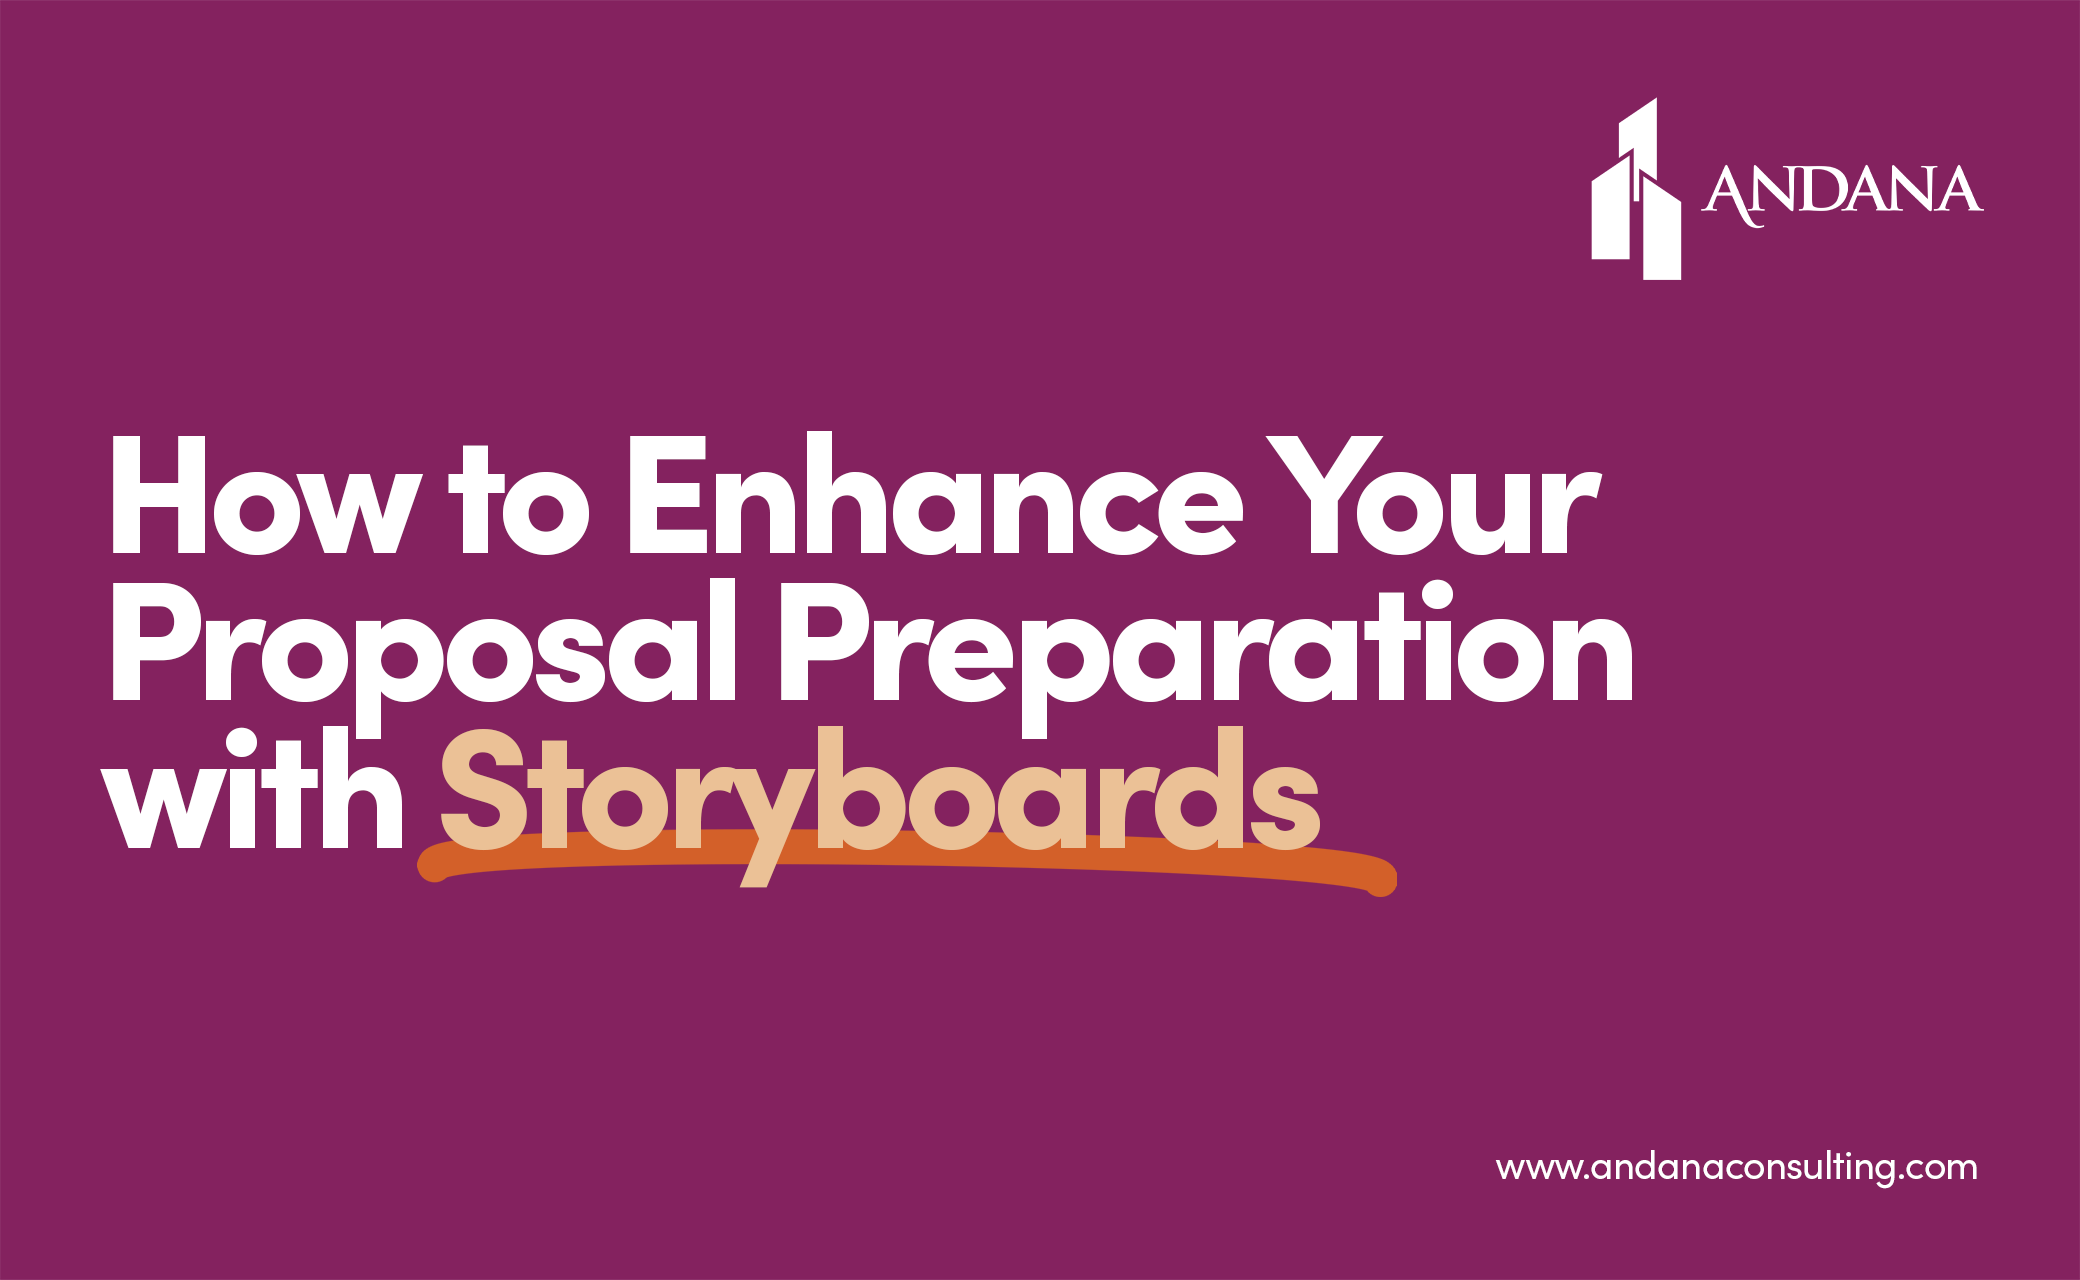 Enhance Your Proposal Preparation with Storyboards